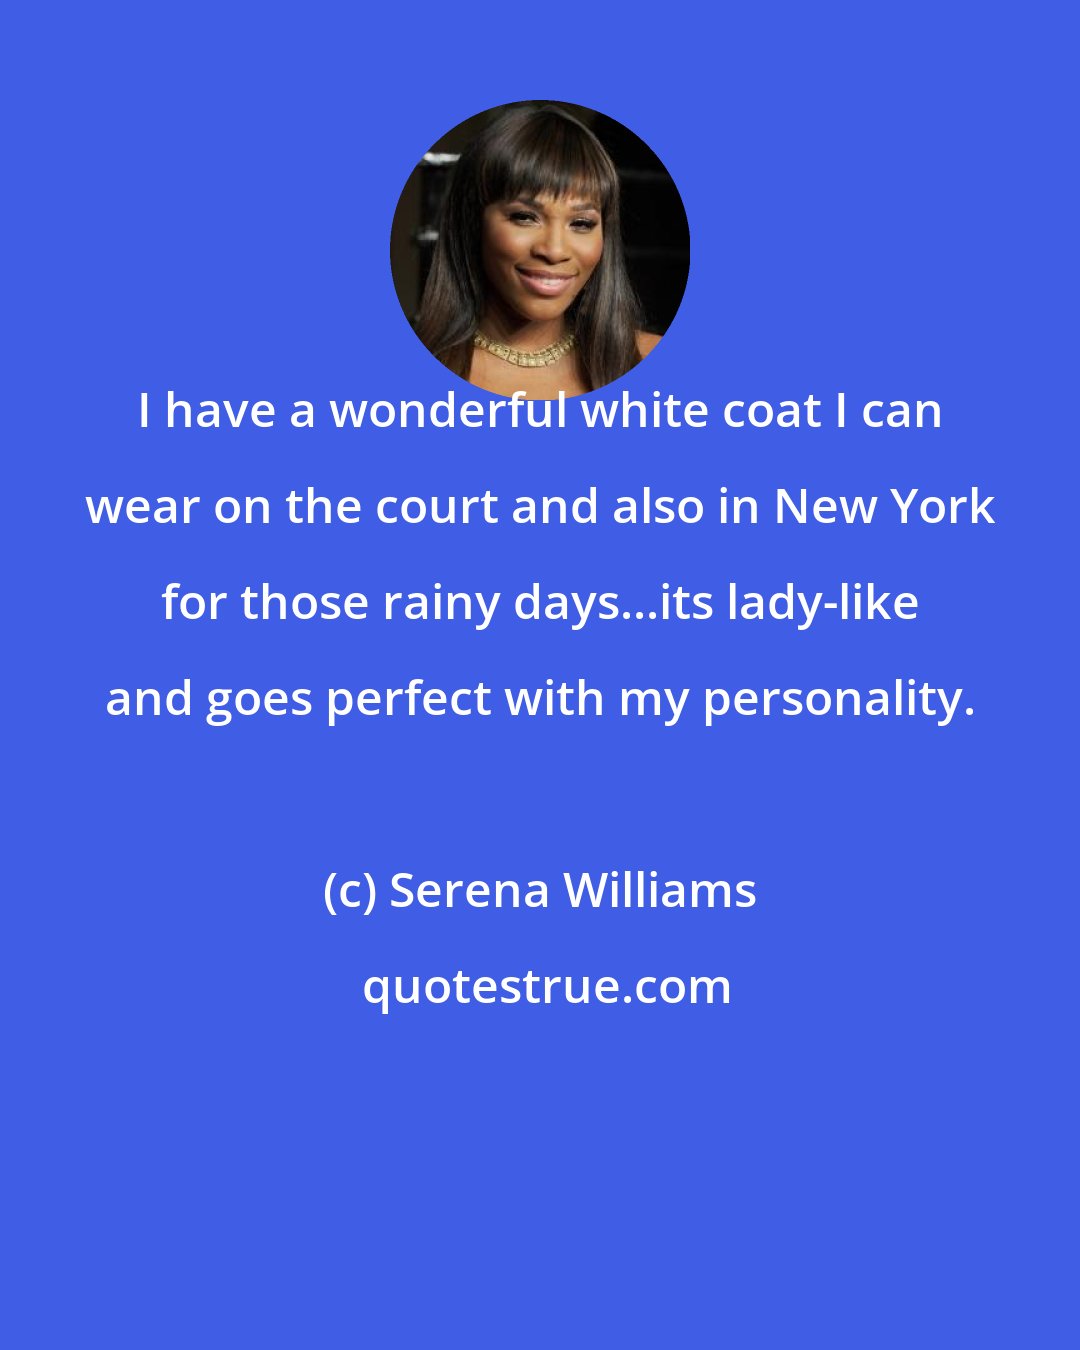 Serena Williams: I have a wonderful white coat I can wear on the court and also in New York for those rainy days...its lady-like and goes perfect with my personality.